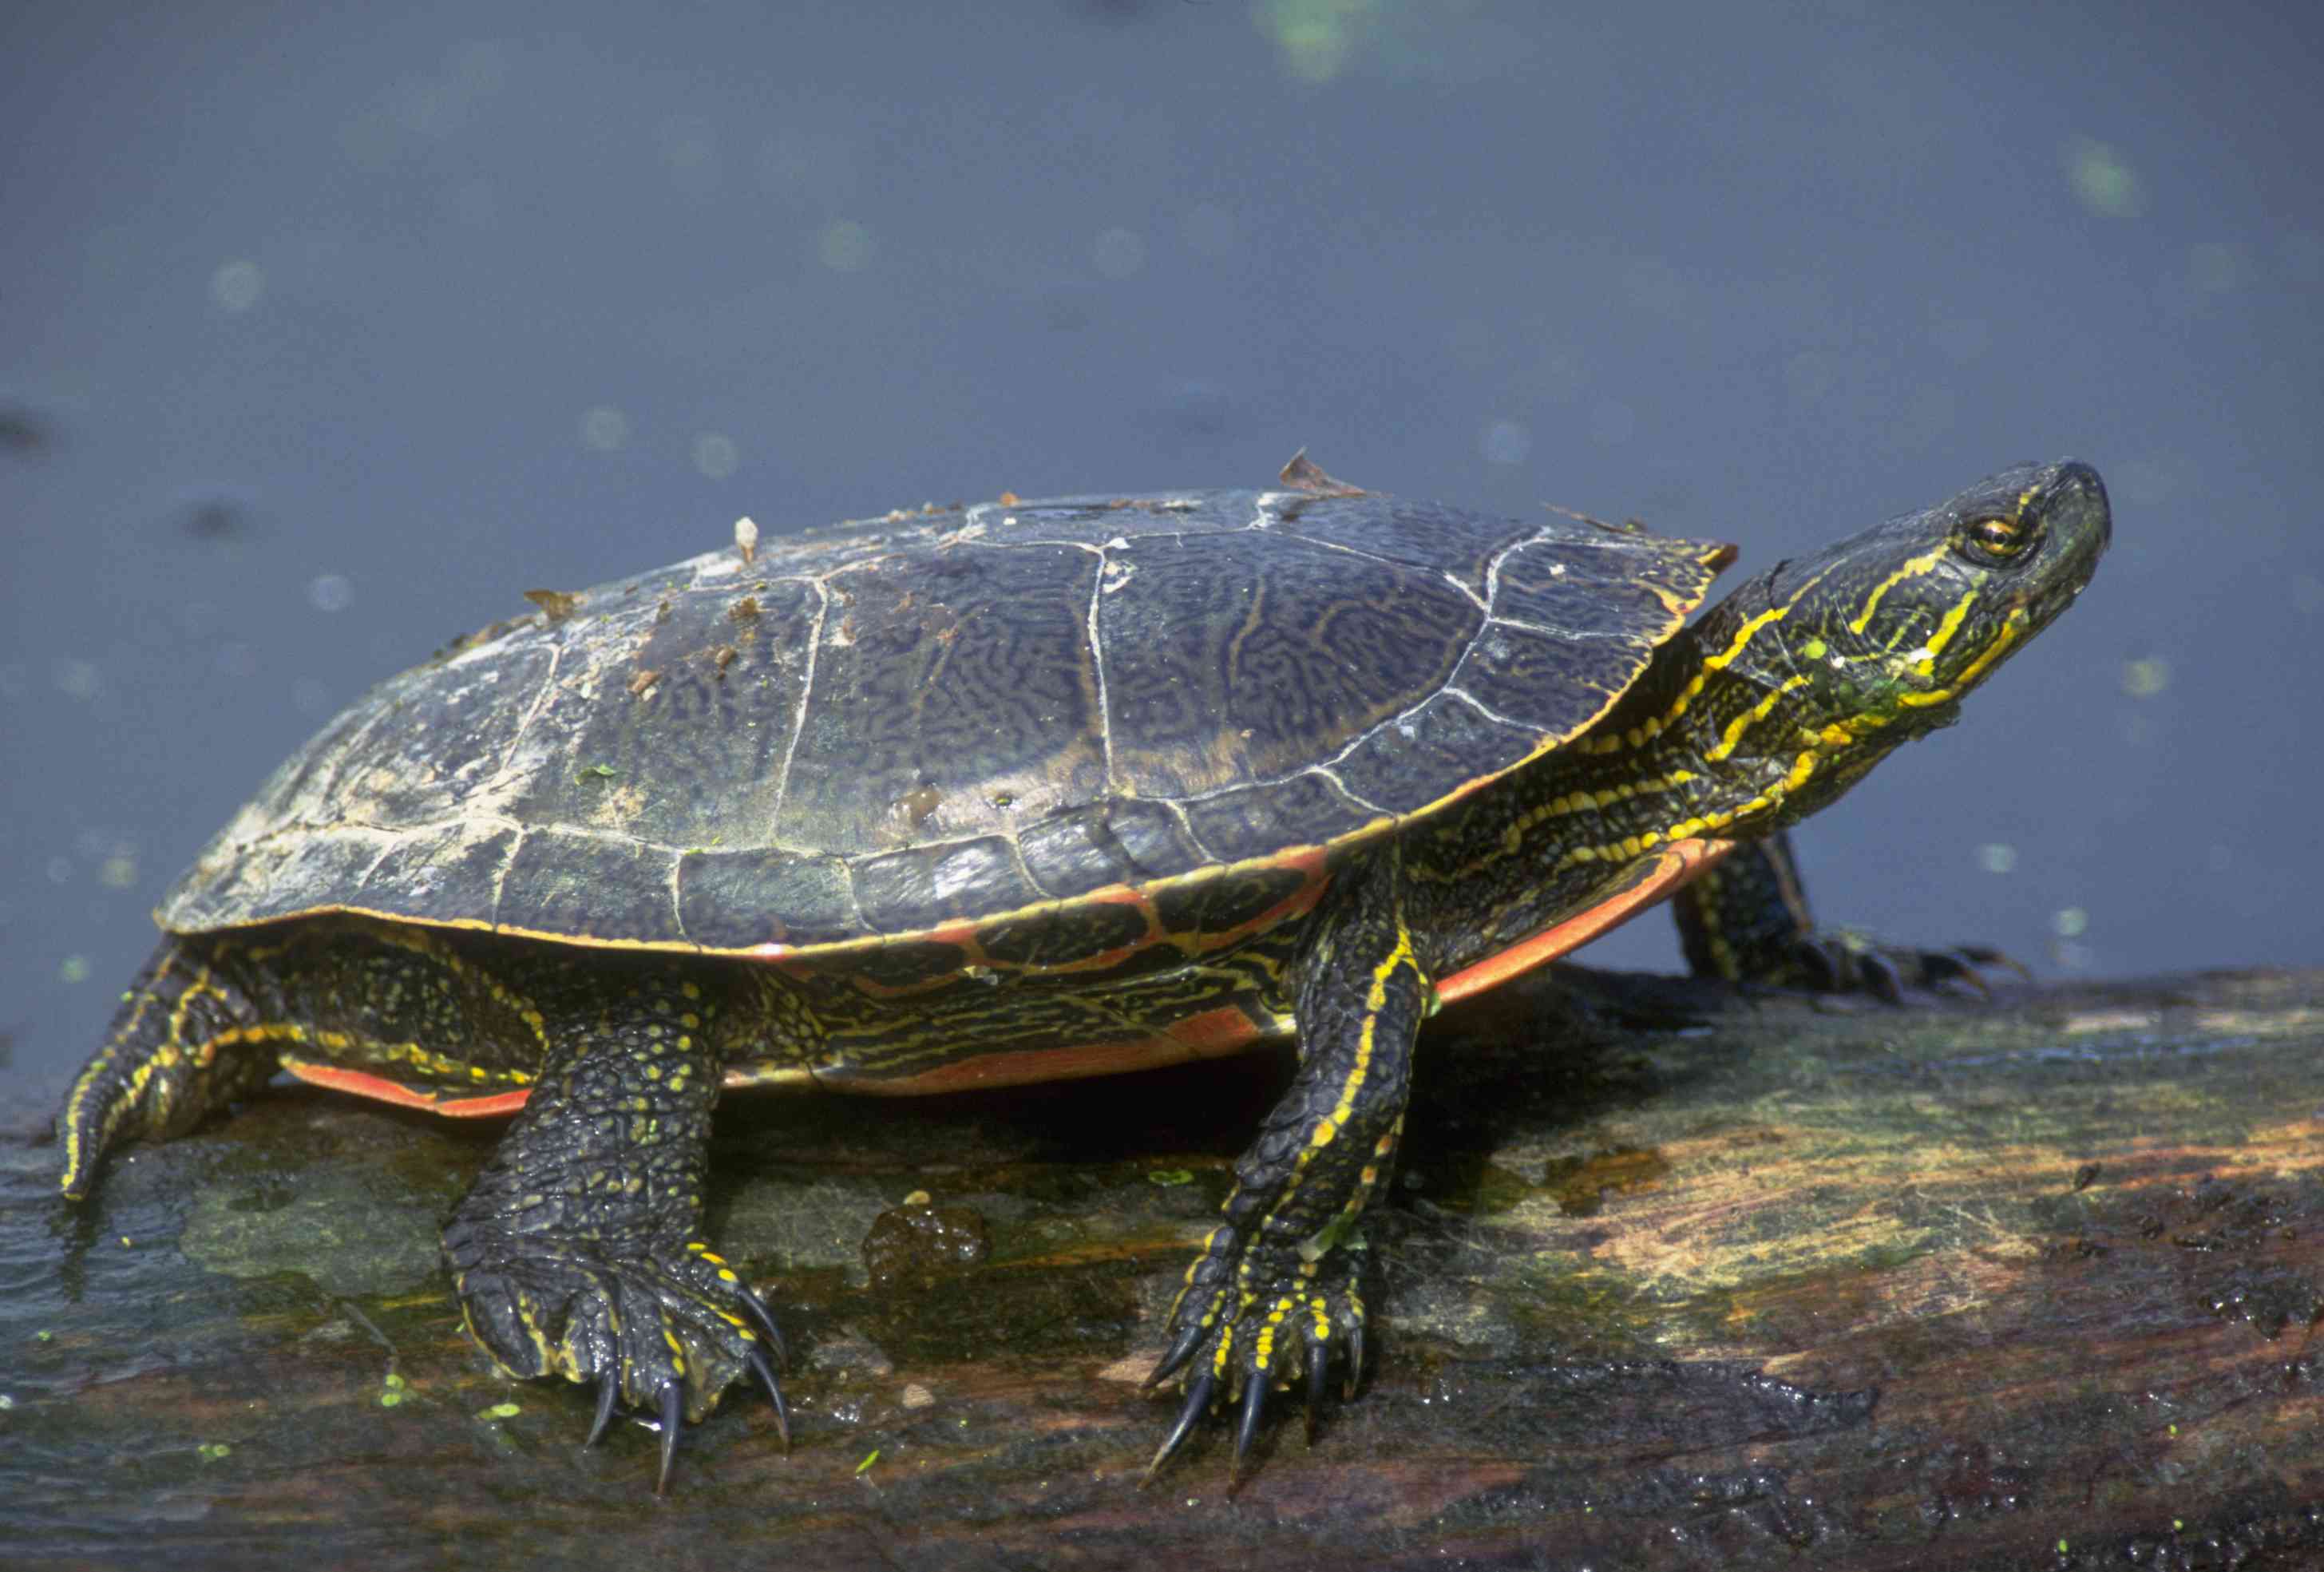 Western Painted Turtle climbing on a log